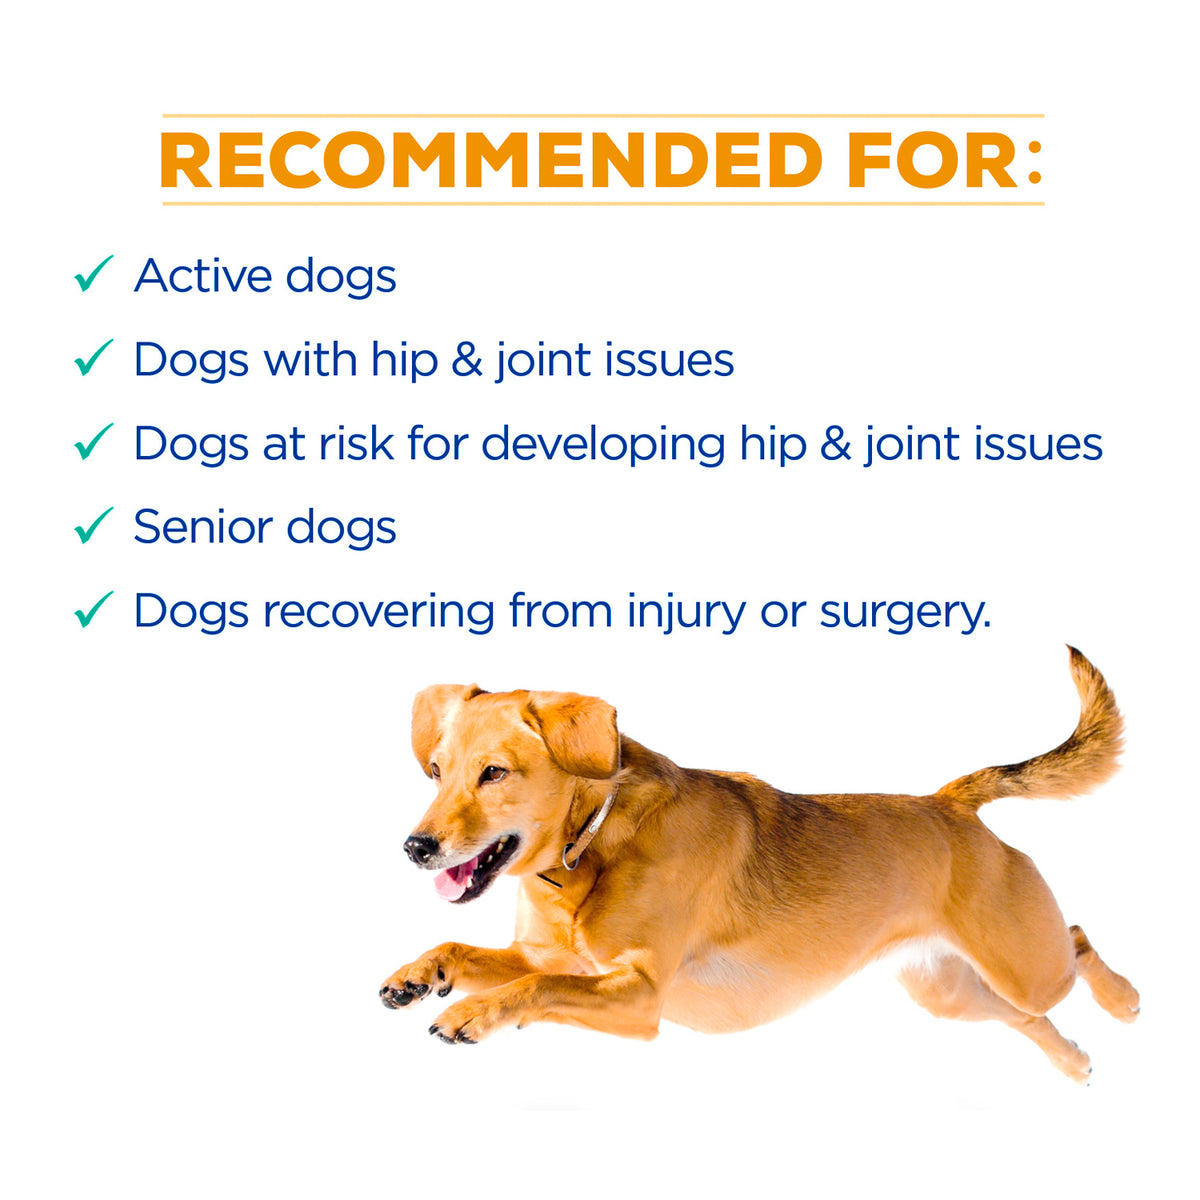 WagWorthy Hip + Joint supplement is recommended for active dogs, dogs with hip and joint issues, and senior dogs